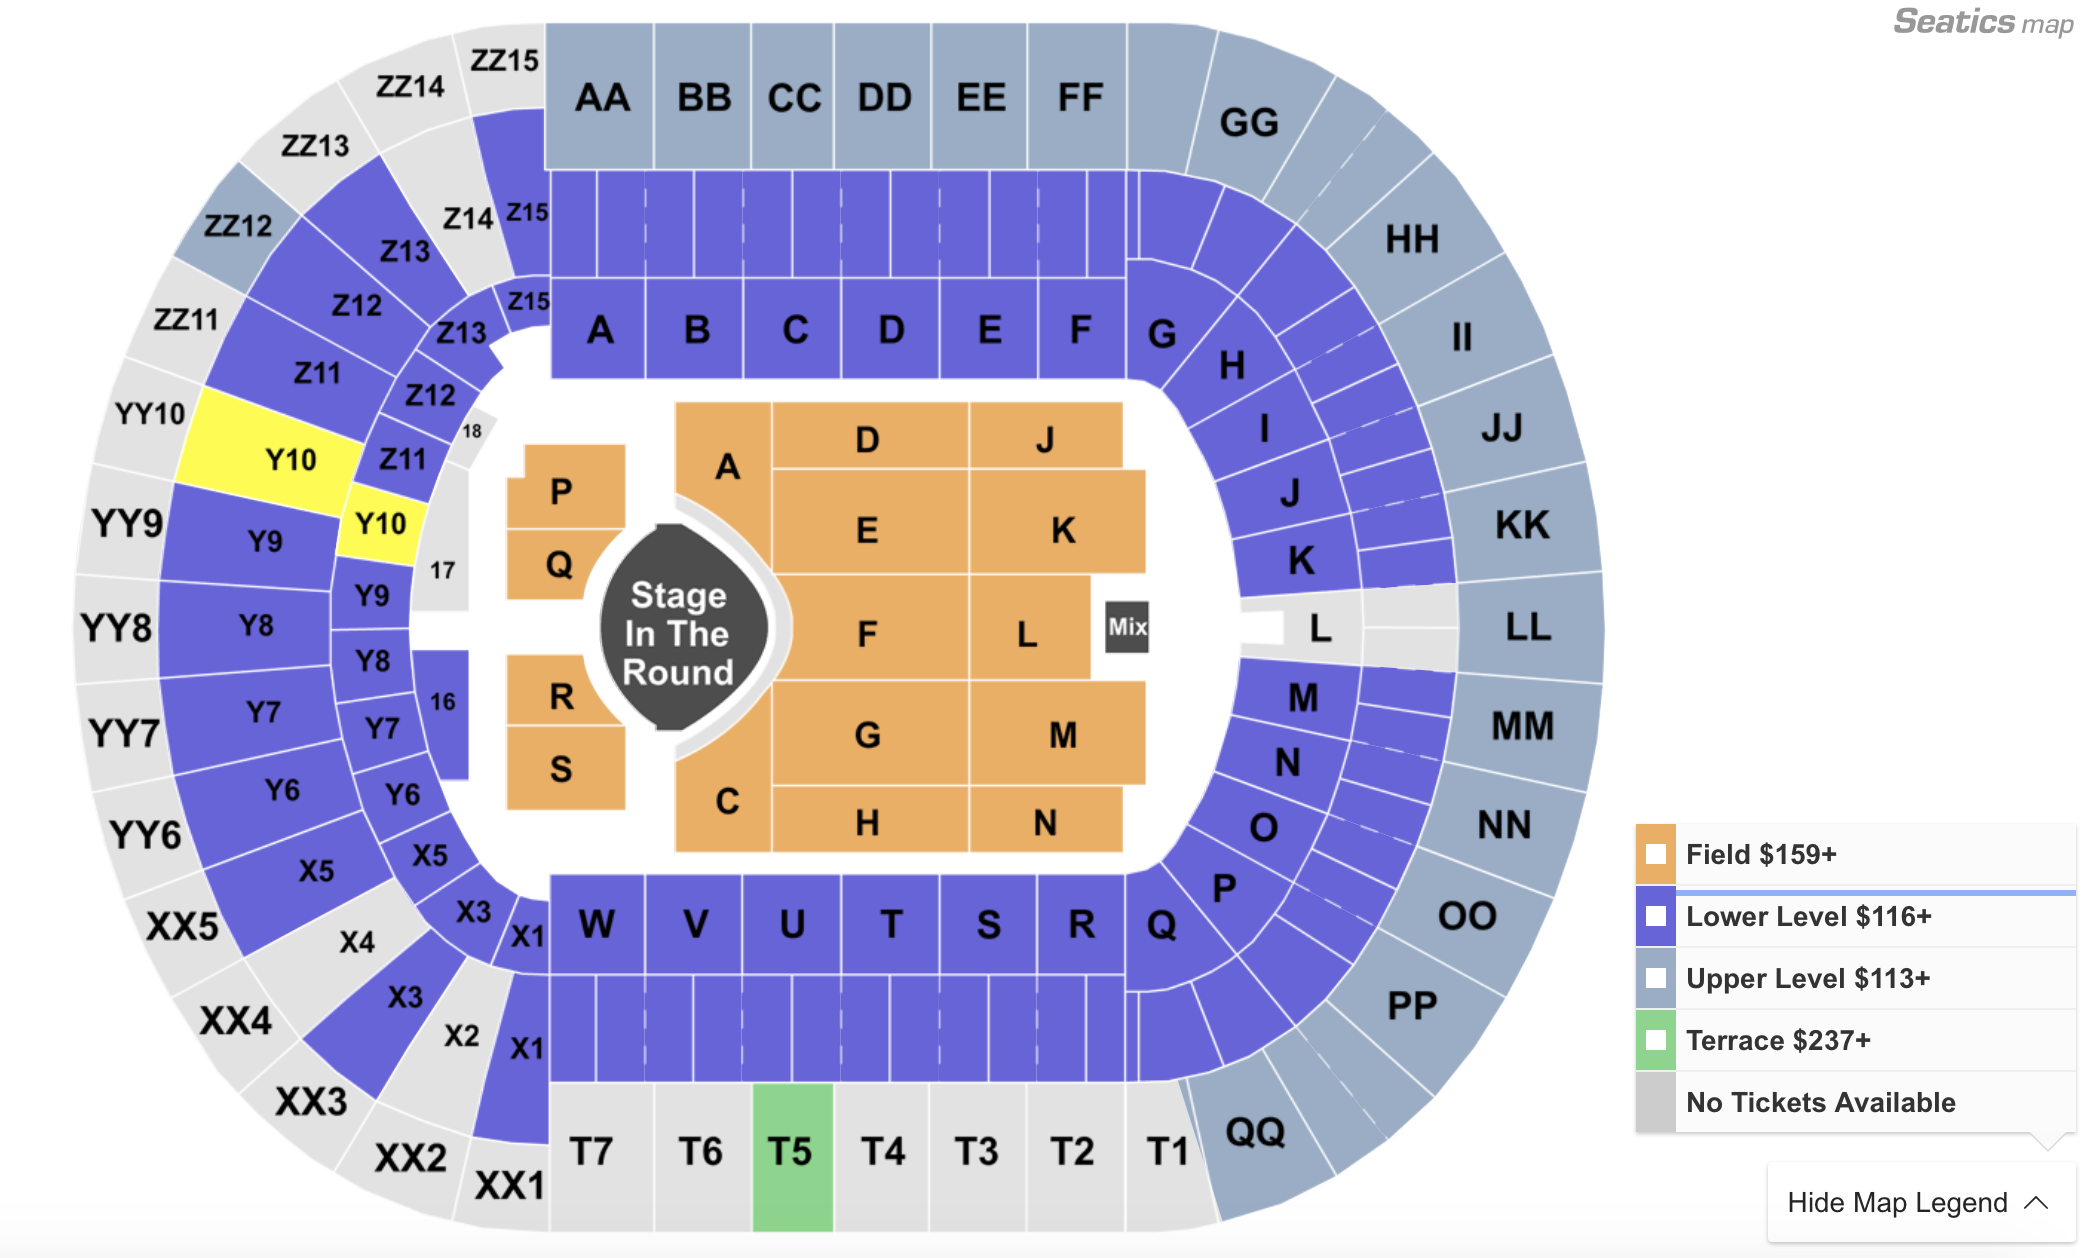 How To Get Cheap Garth Brooks Tickets + Face Value Options ...